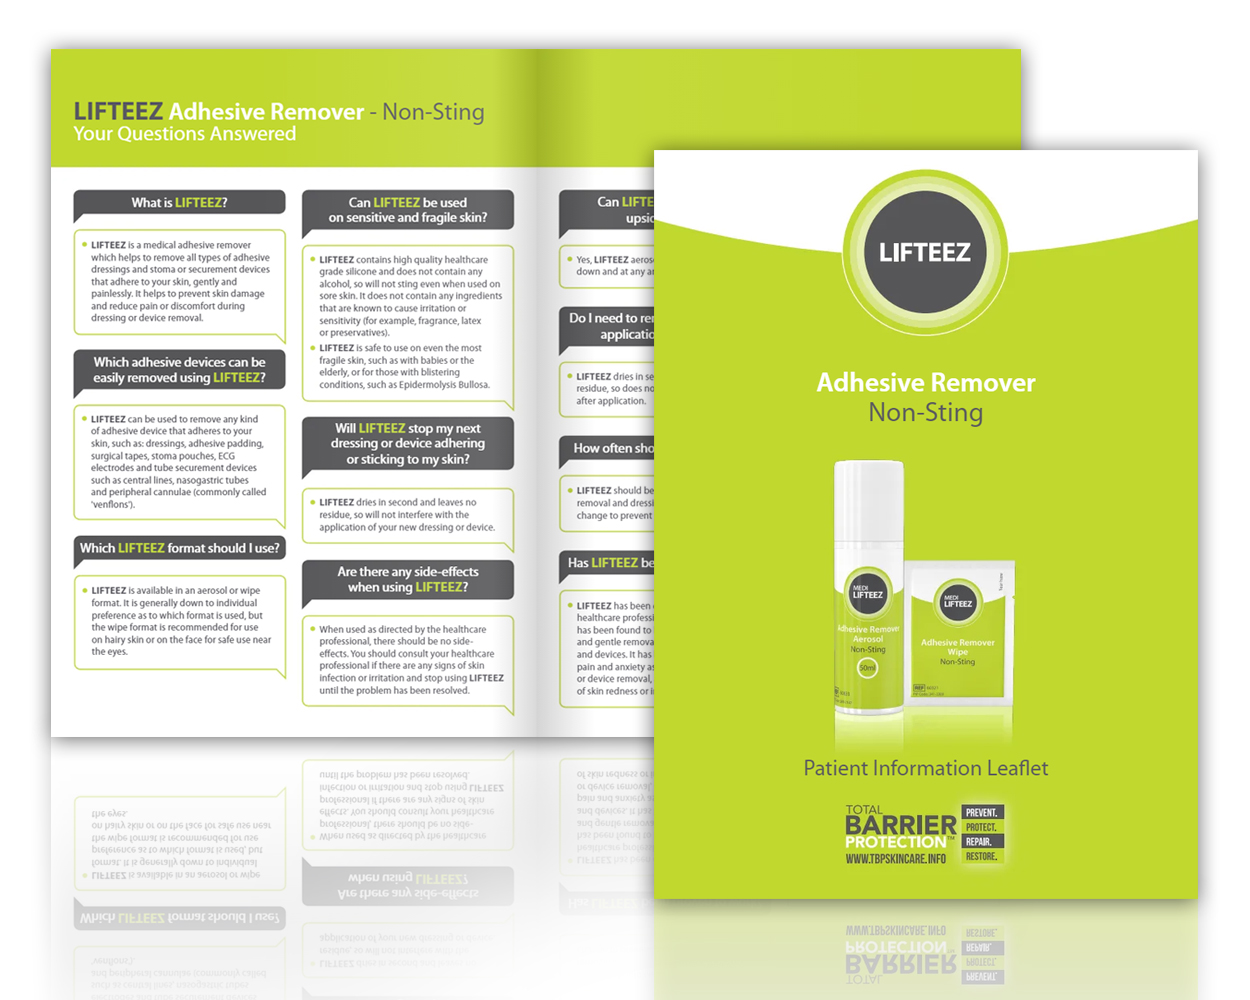 Lifteez Medical Adhesive Remover - Patient Information Leaflet